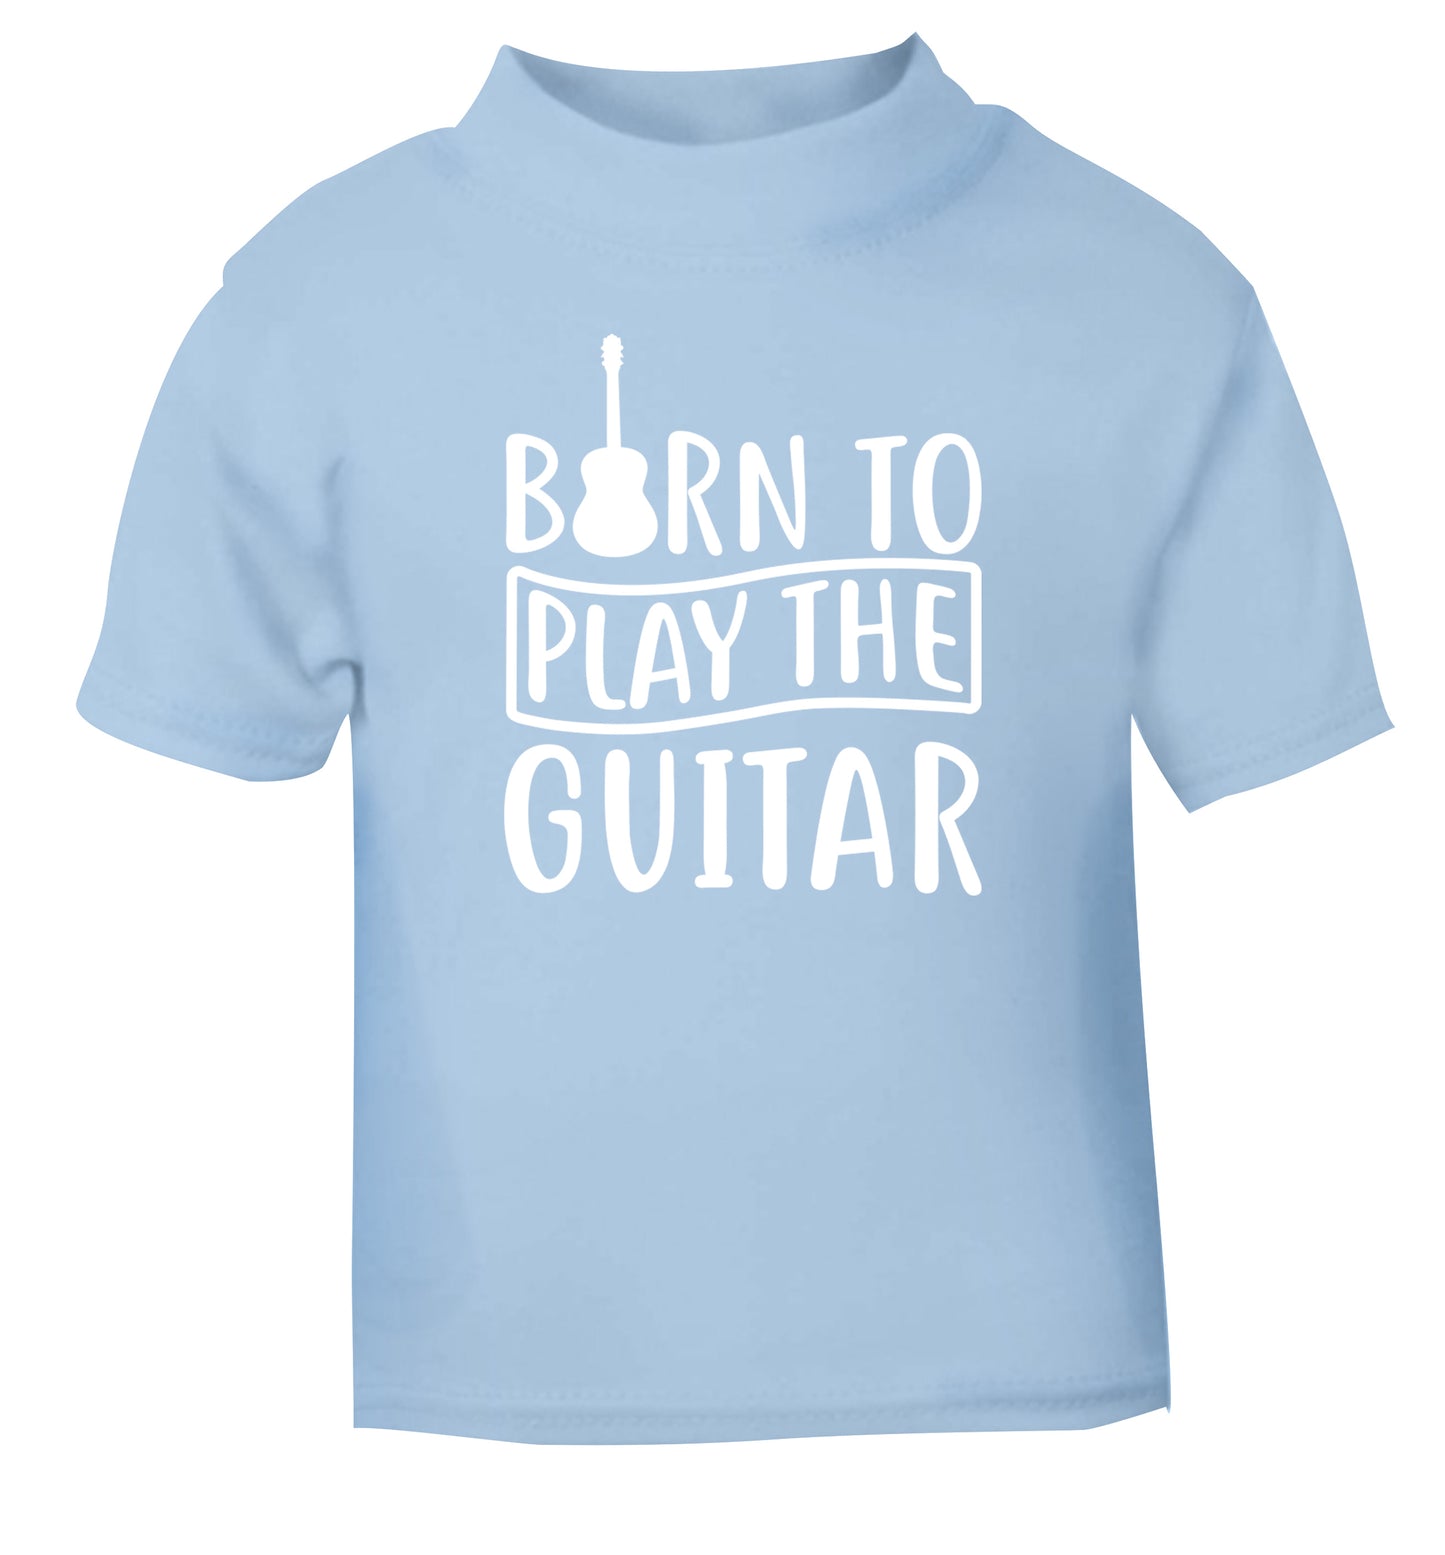 Born to play the guitar light blue Baby Toddler Tshirt 2 Years